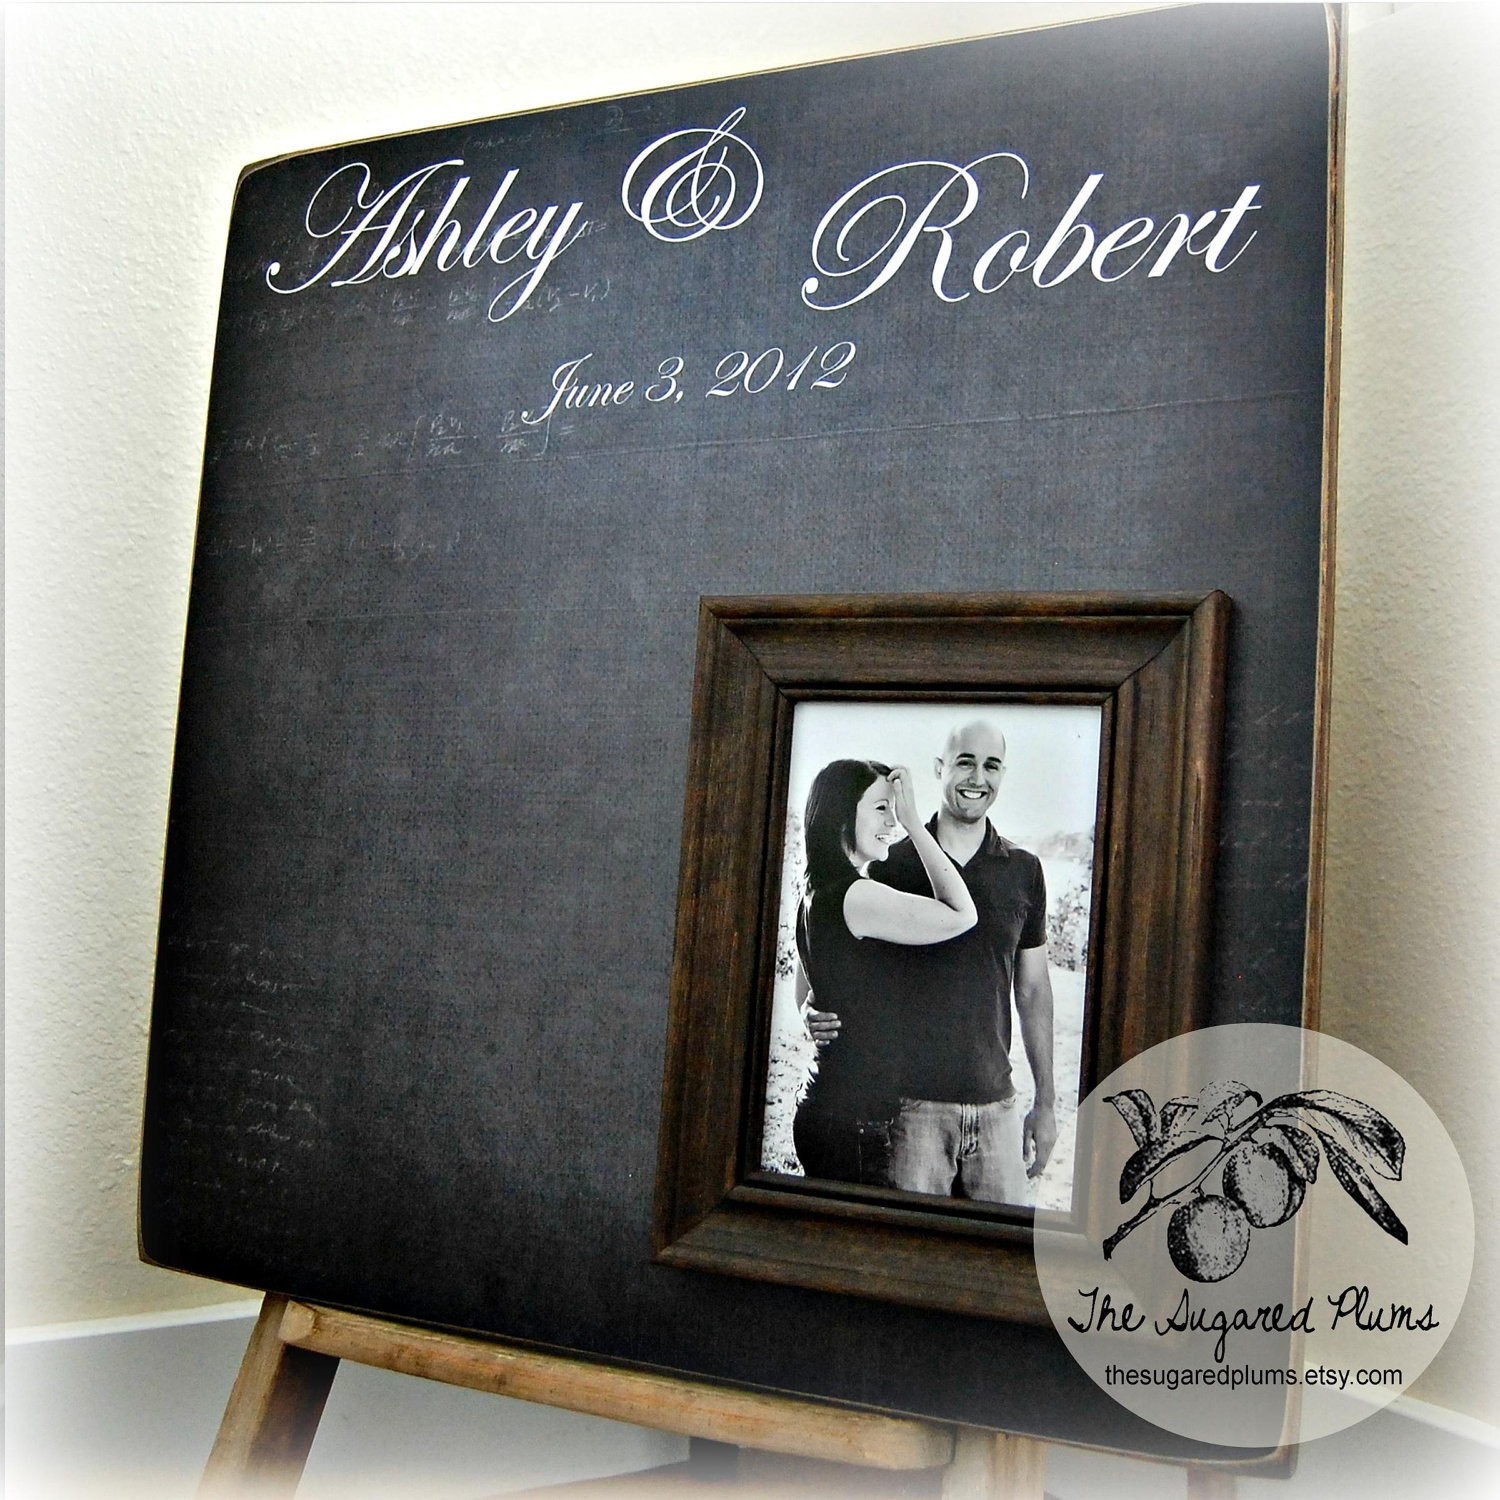 Wedding Guest Book Frame
 Guest Book Wedding Personalized Picture Frame by